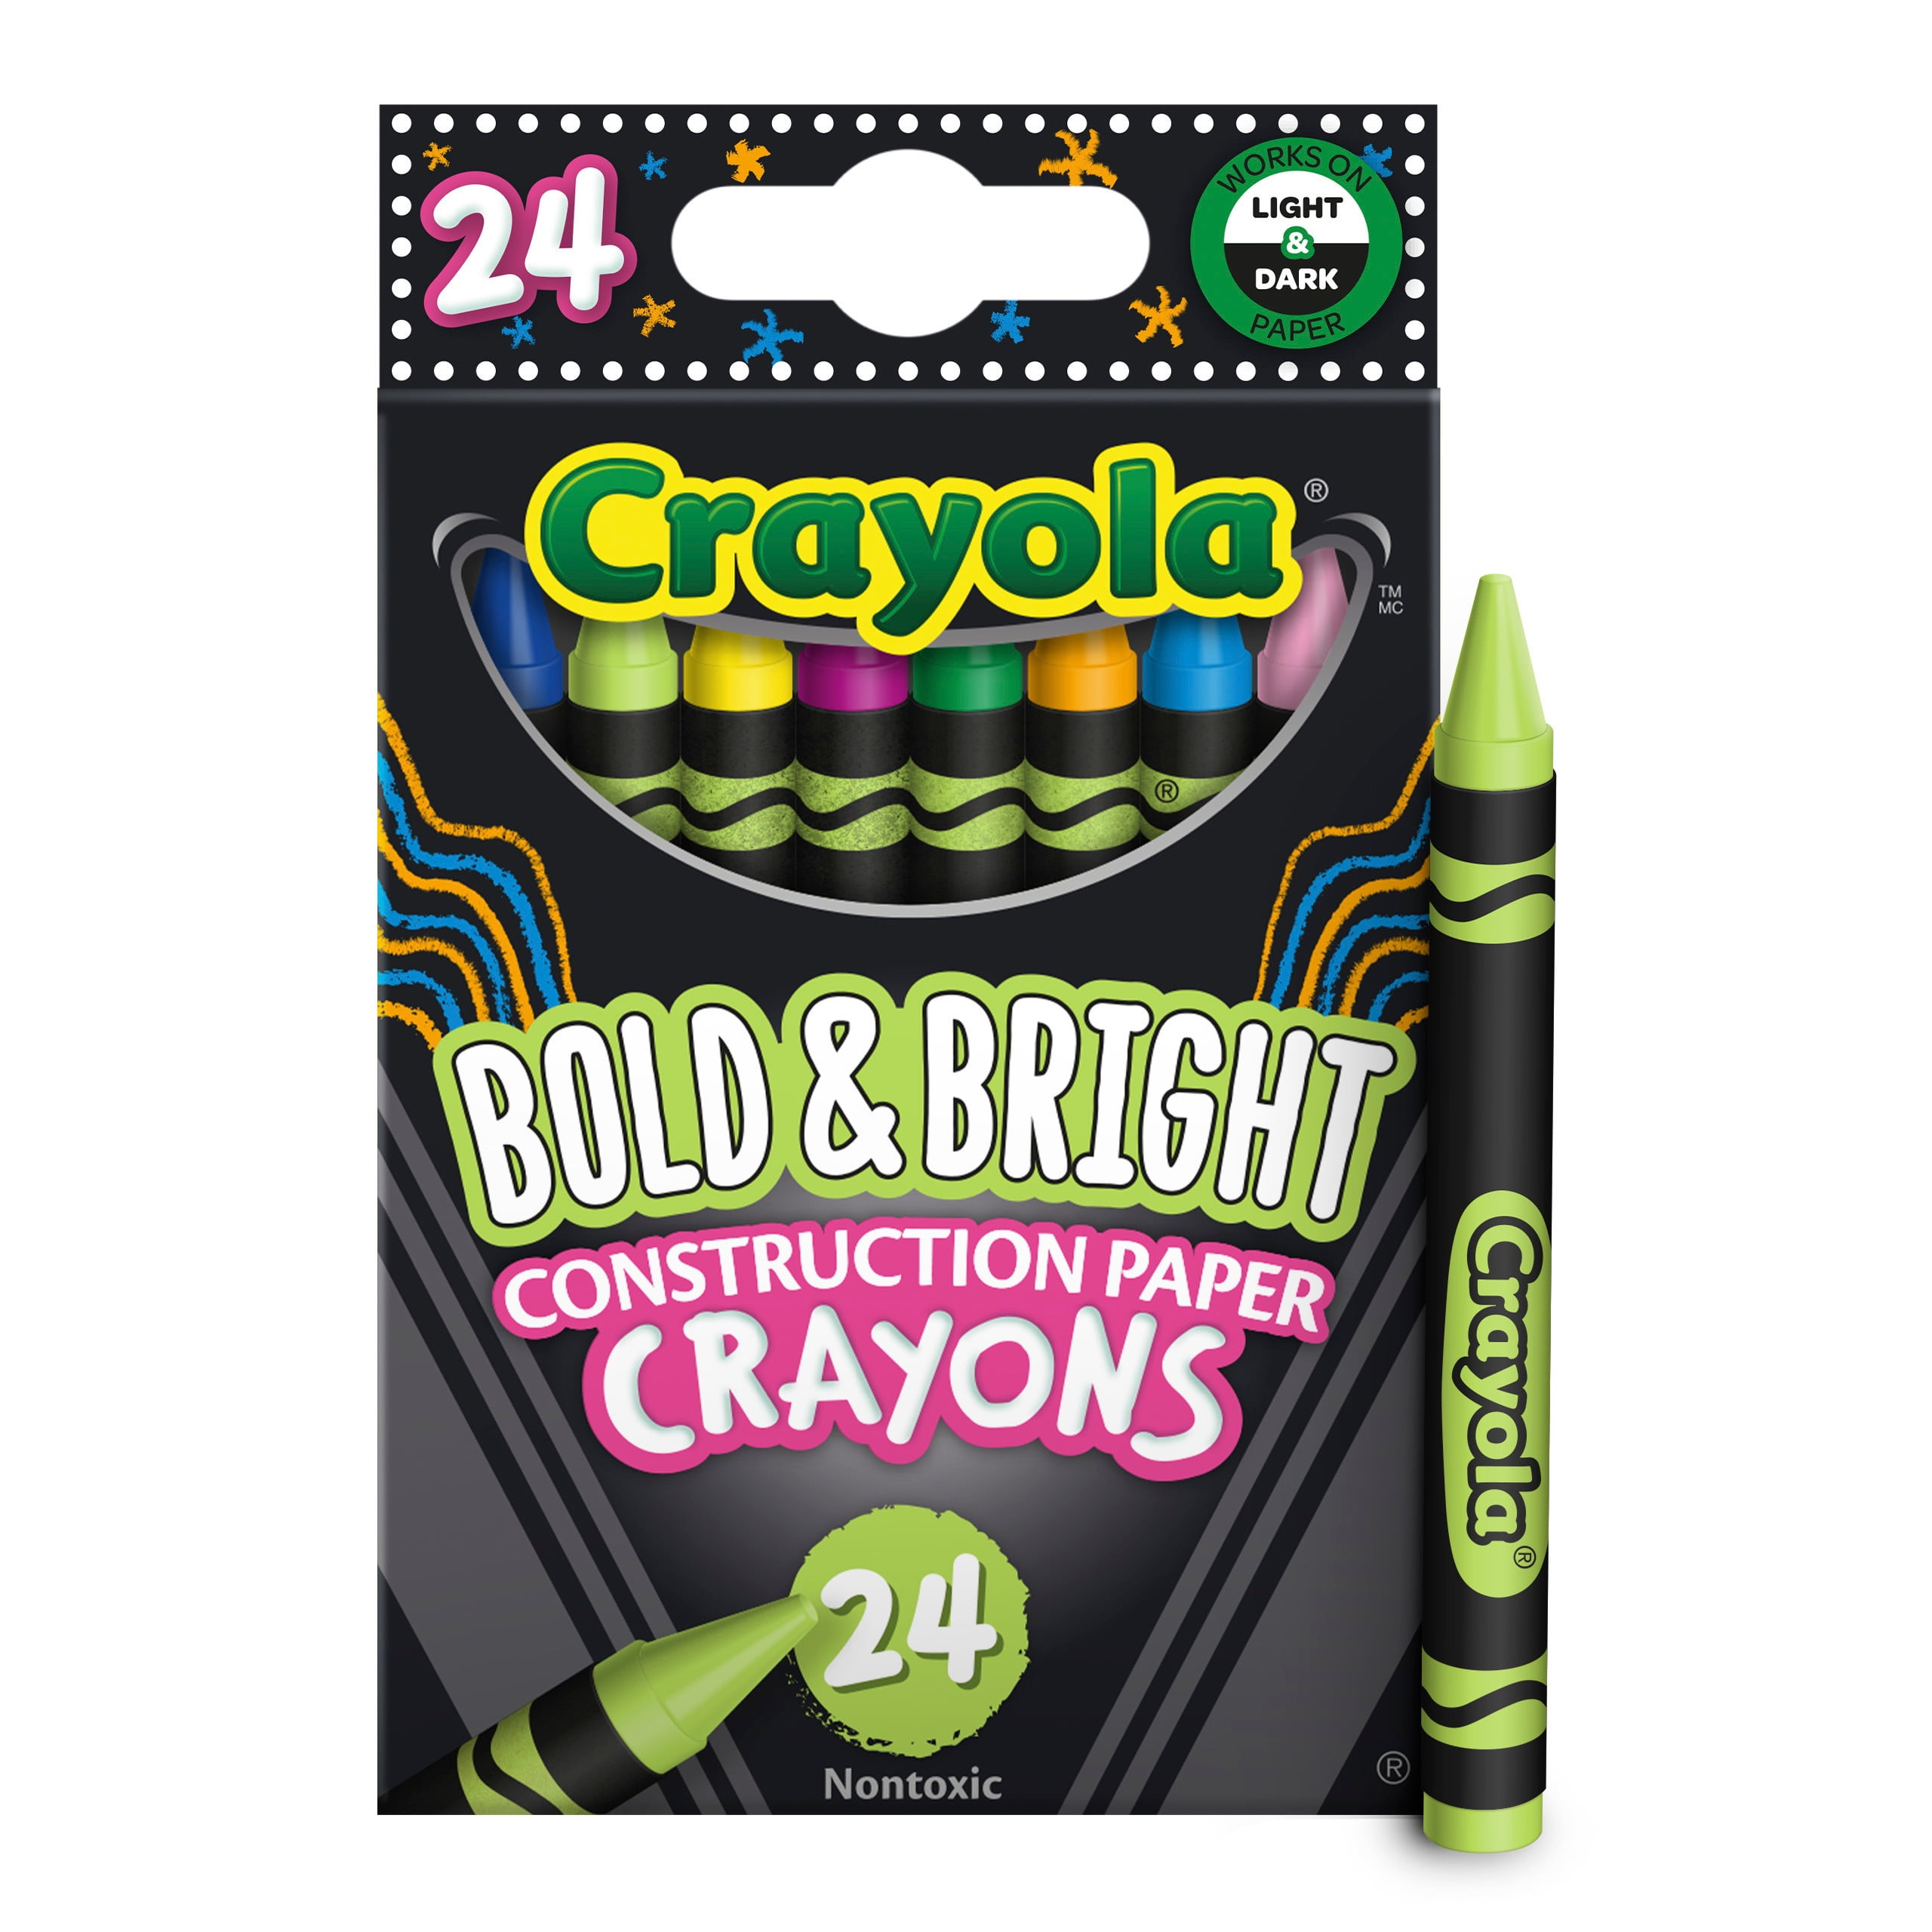 We Are The Brightest Crayons In The Box - Personalized Teacher